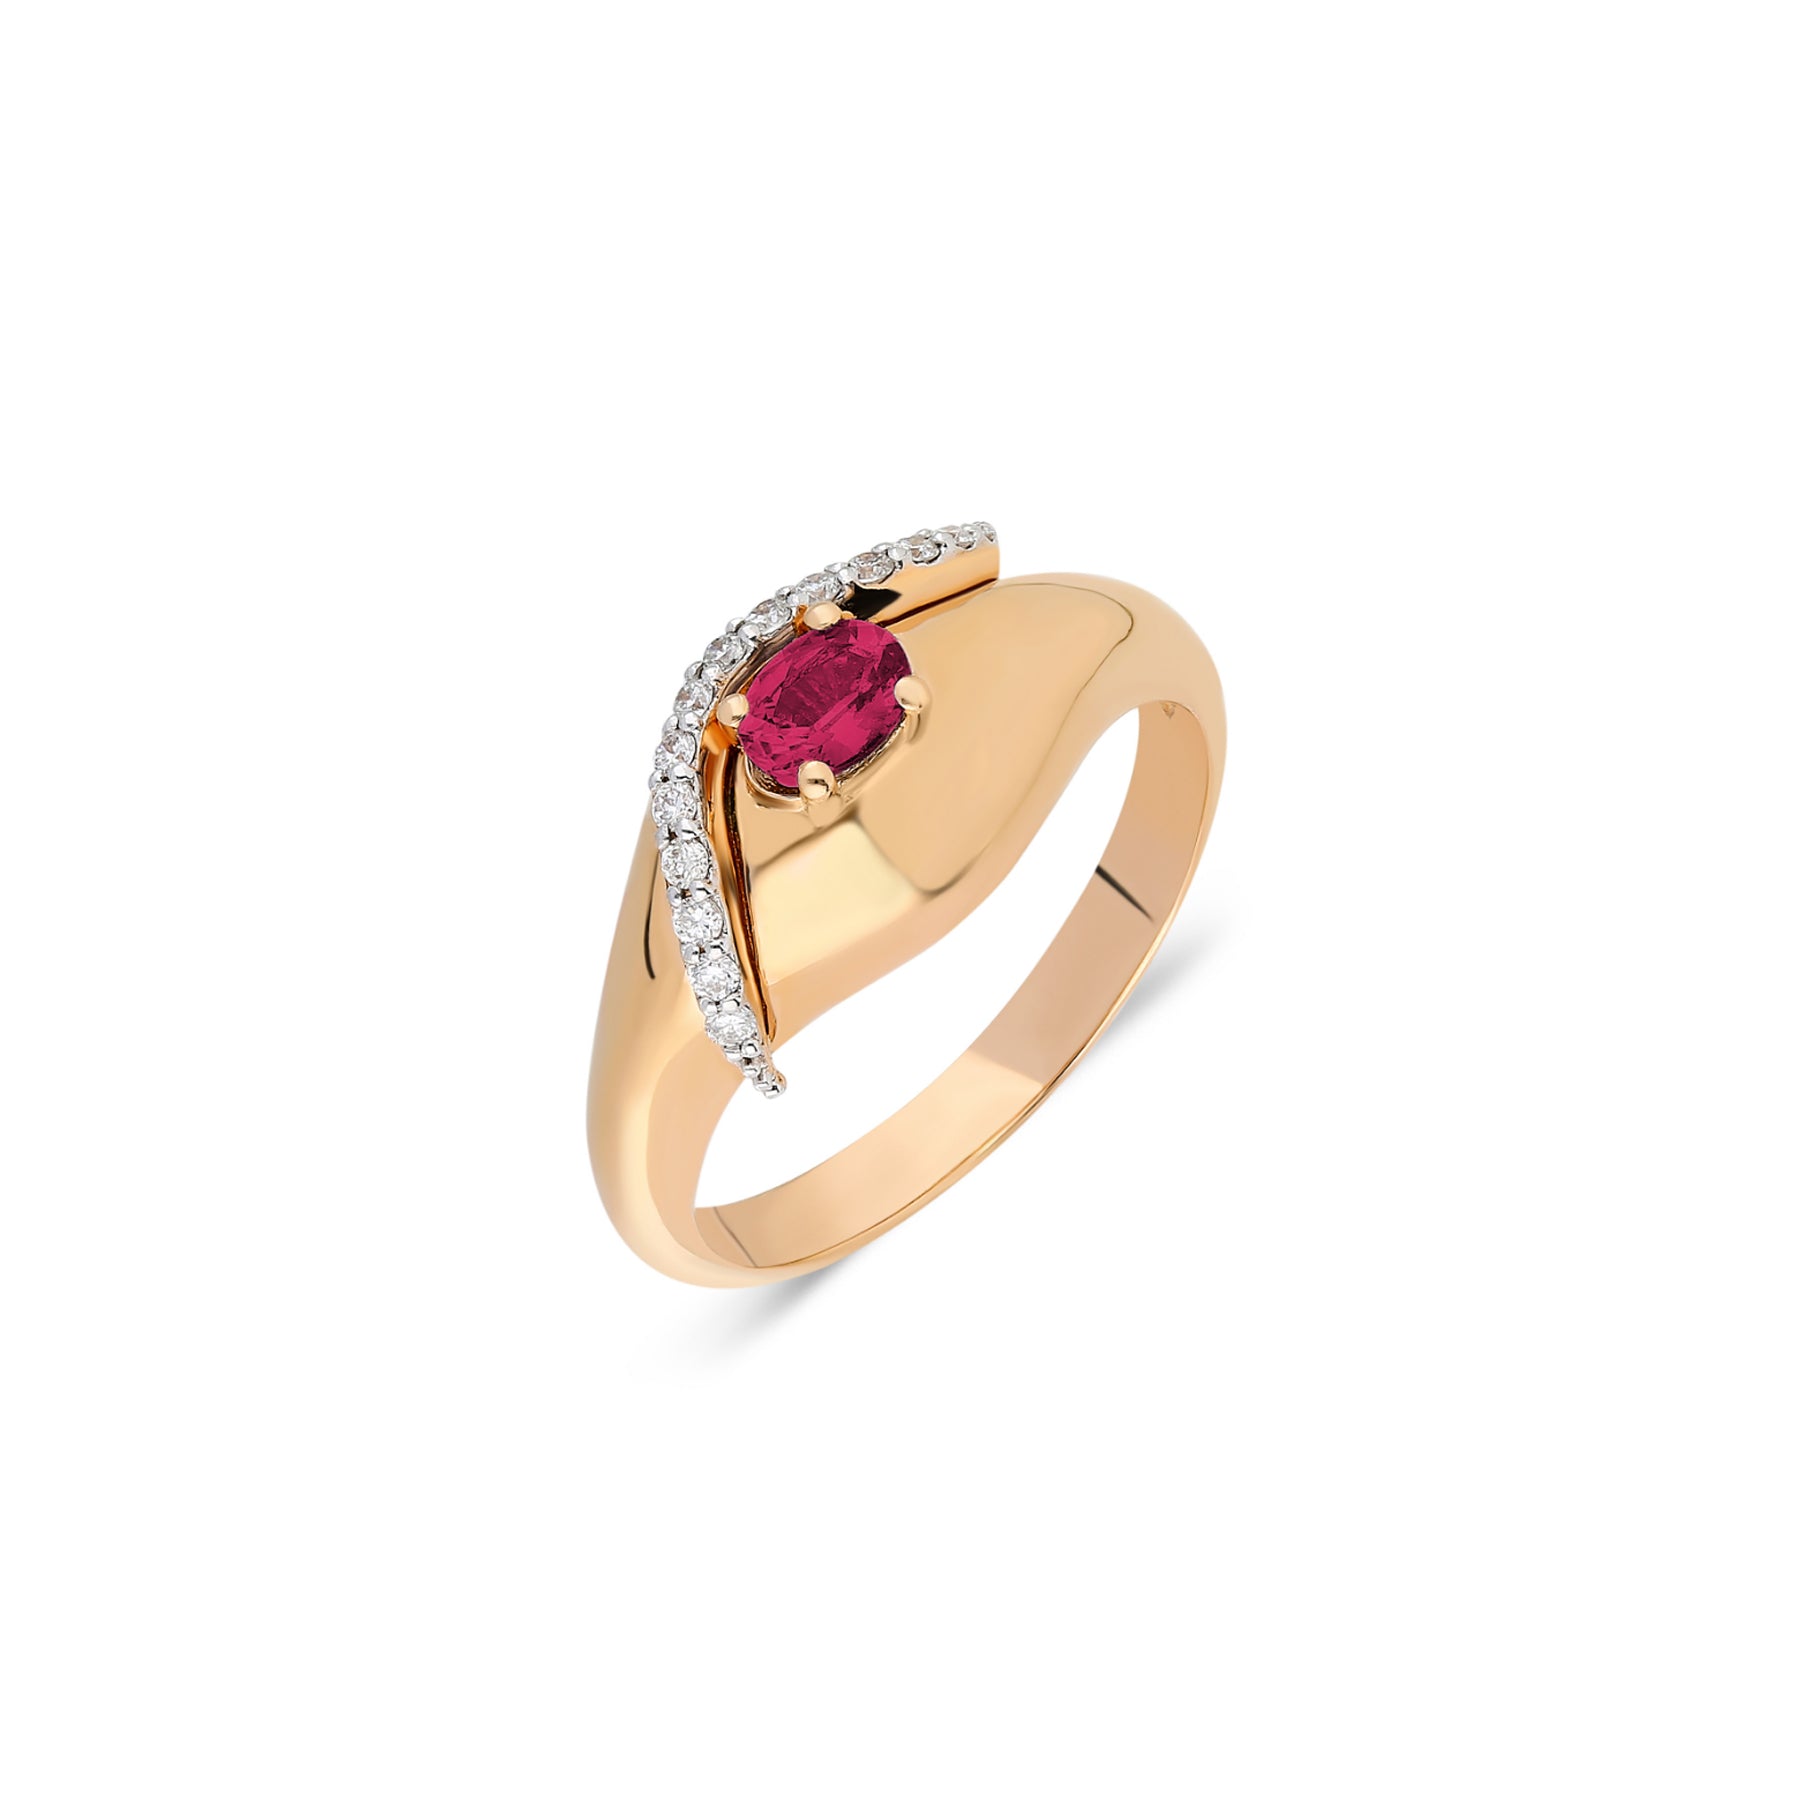 Lawa Ring with Rubies